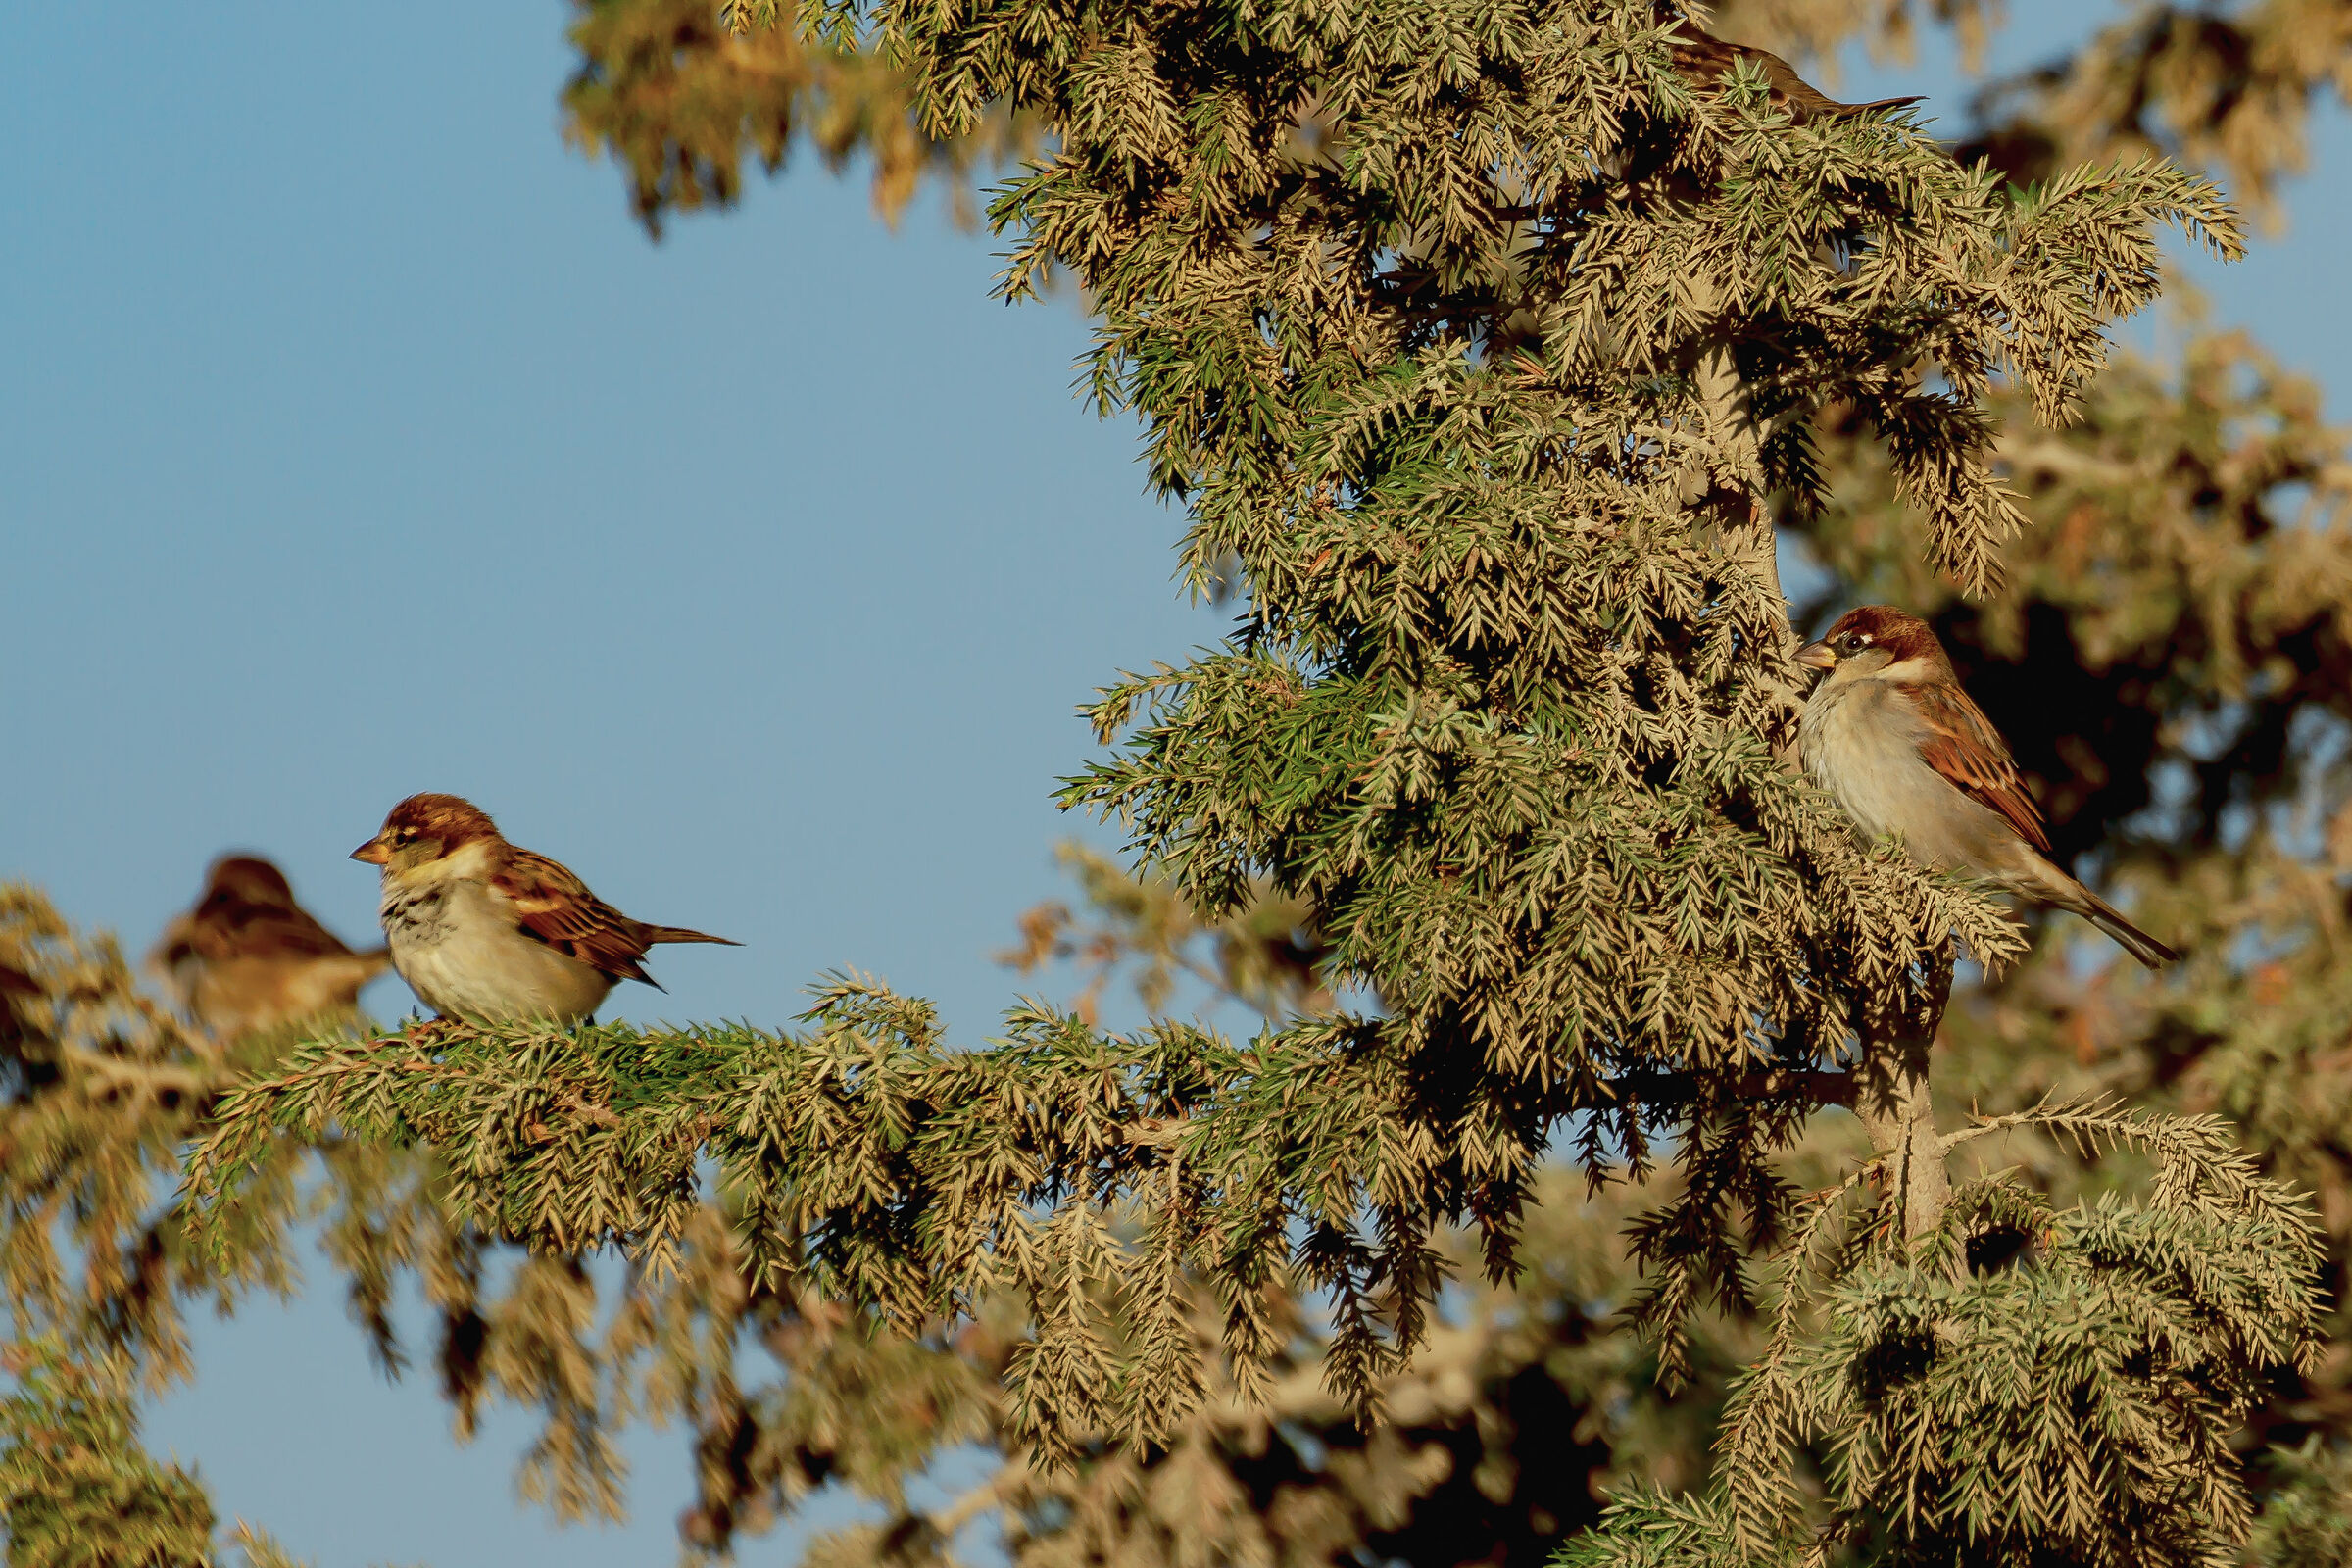 Sparrows at rest...